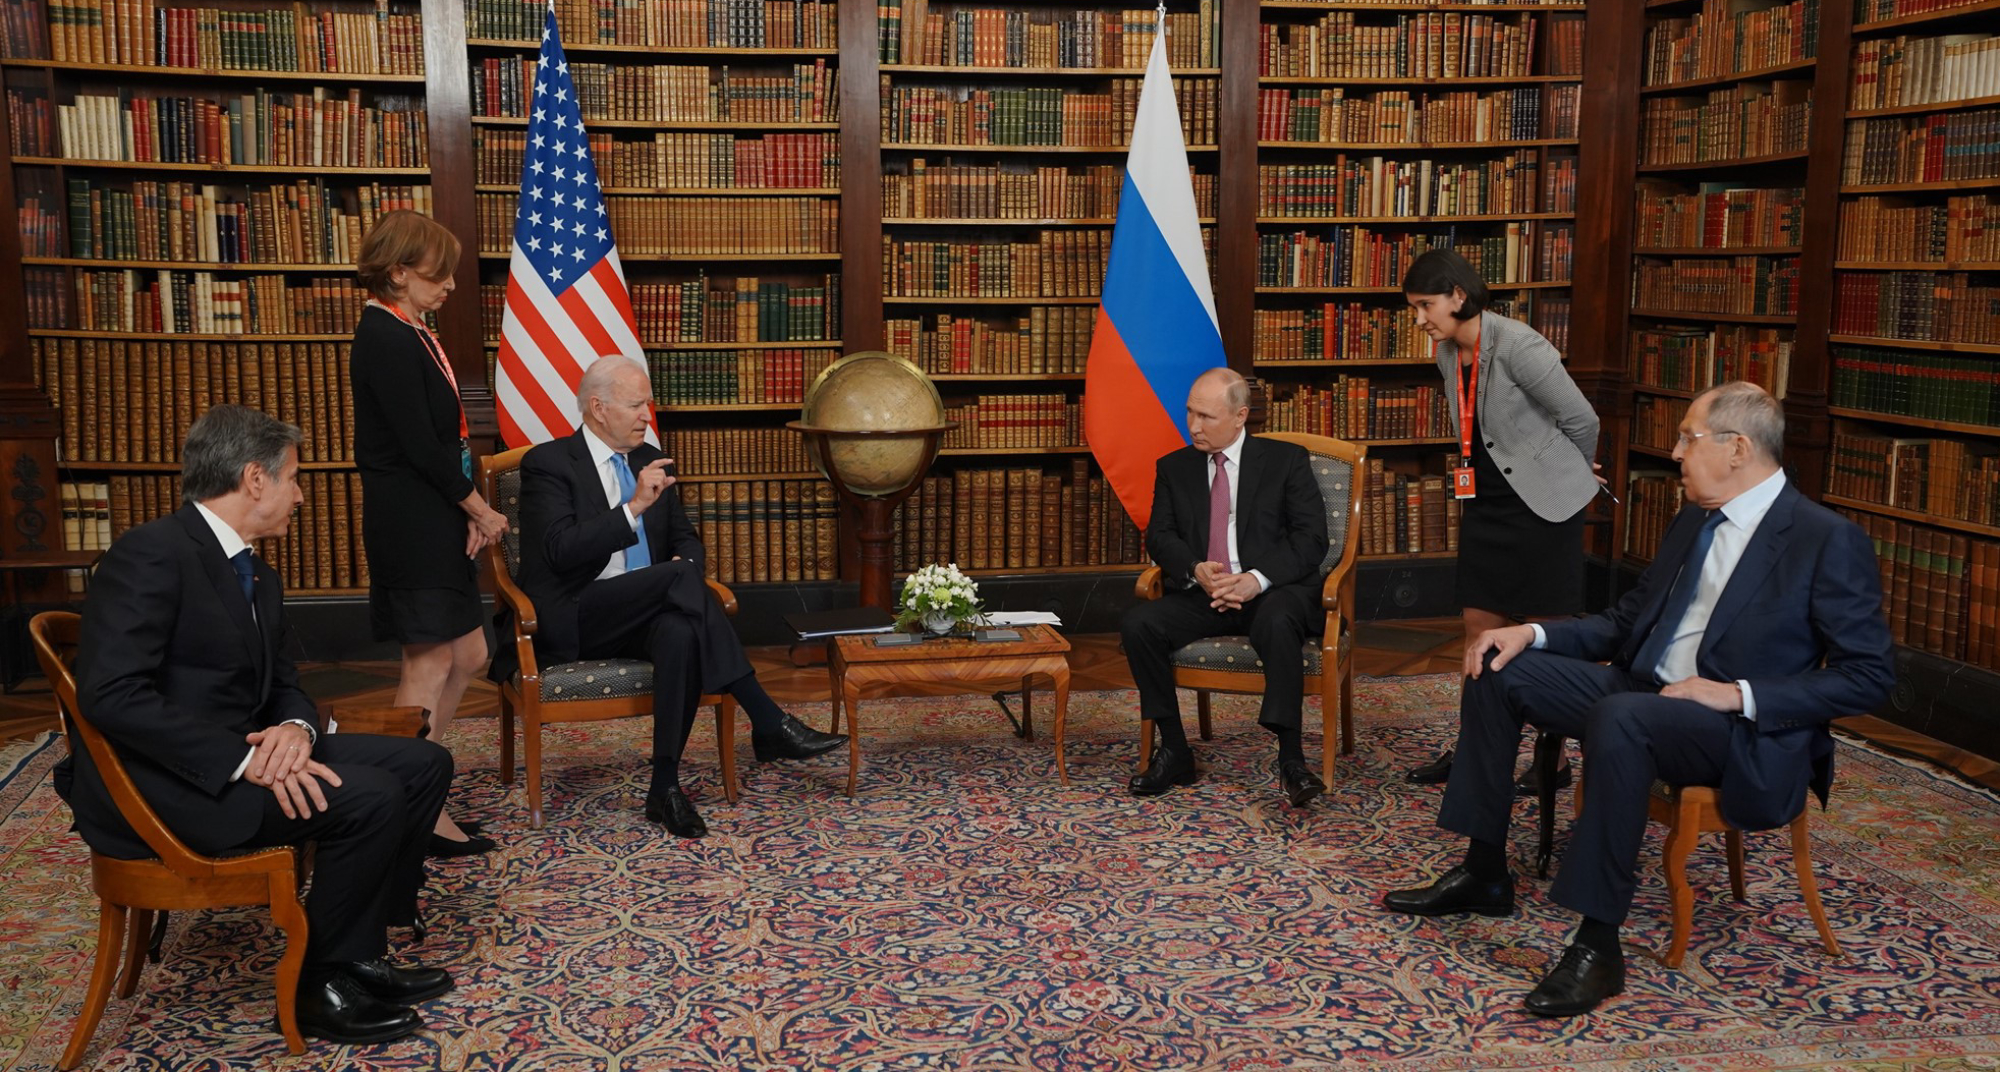 Meeting between President Biden and President Putin during the 2021 Russia–United States summit in Geneva, on June 16, 2021. Source: Facebook account of The White House.